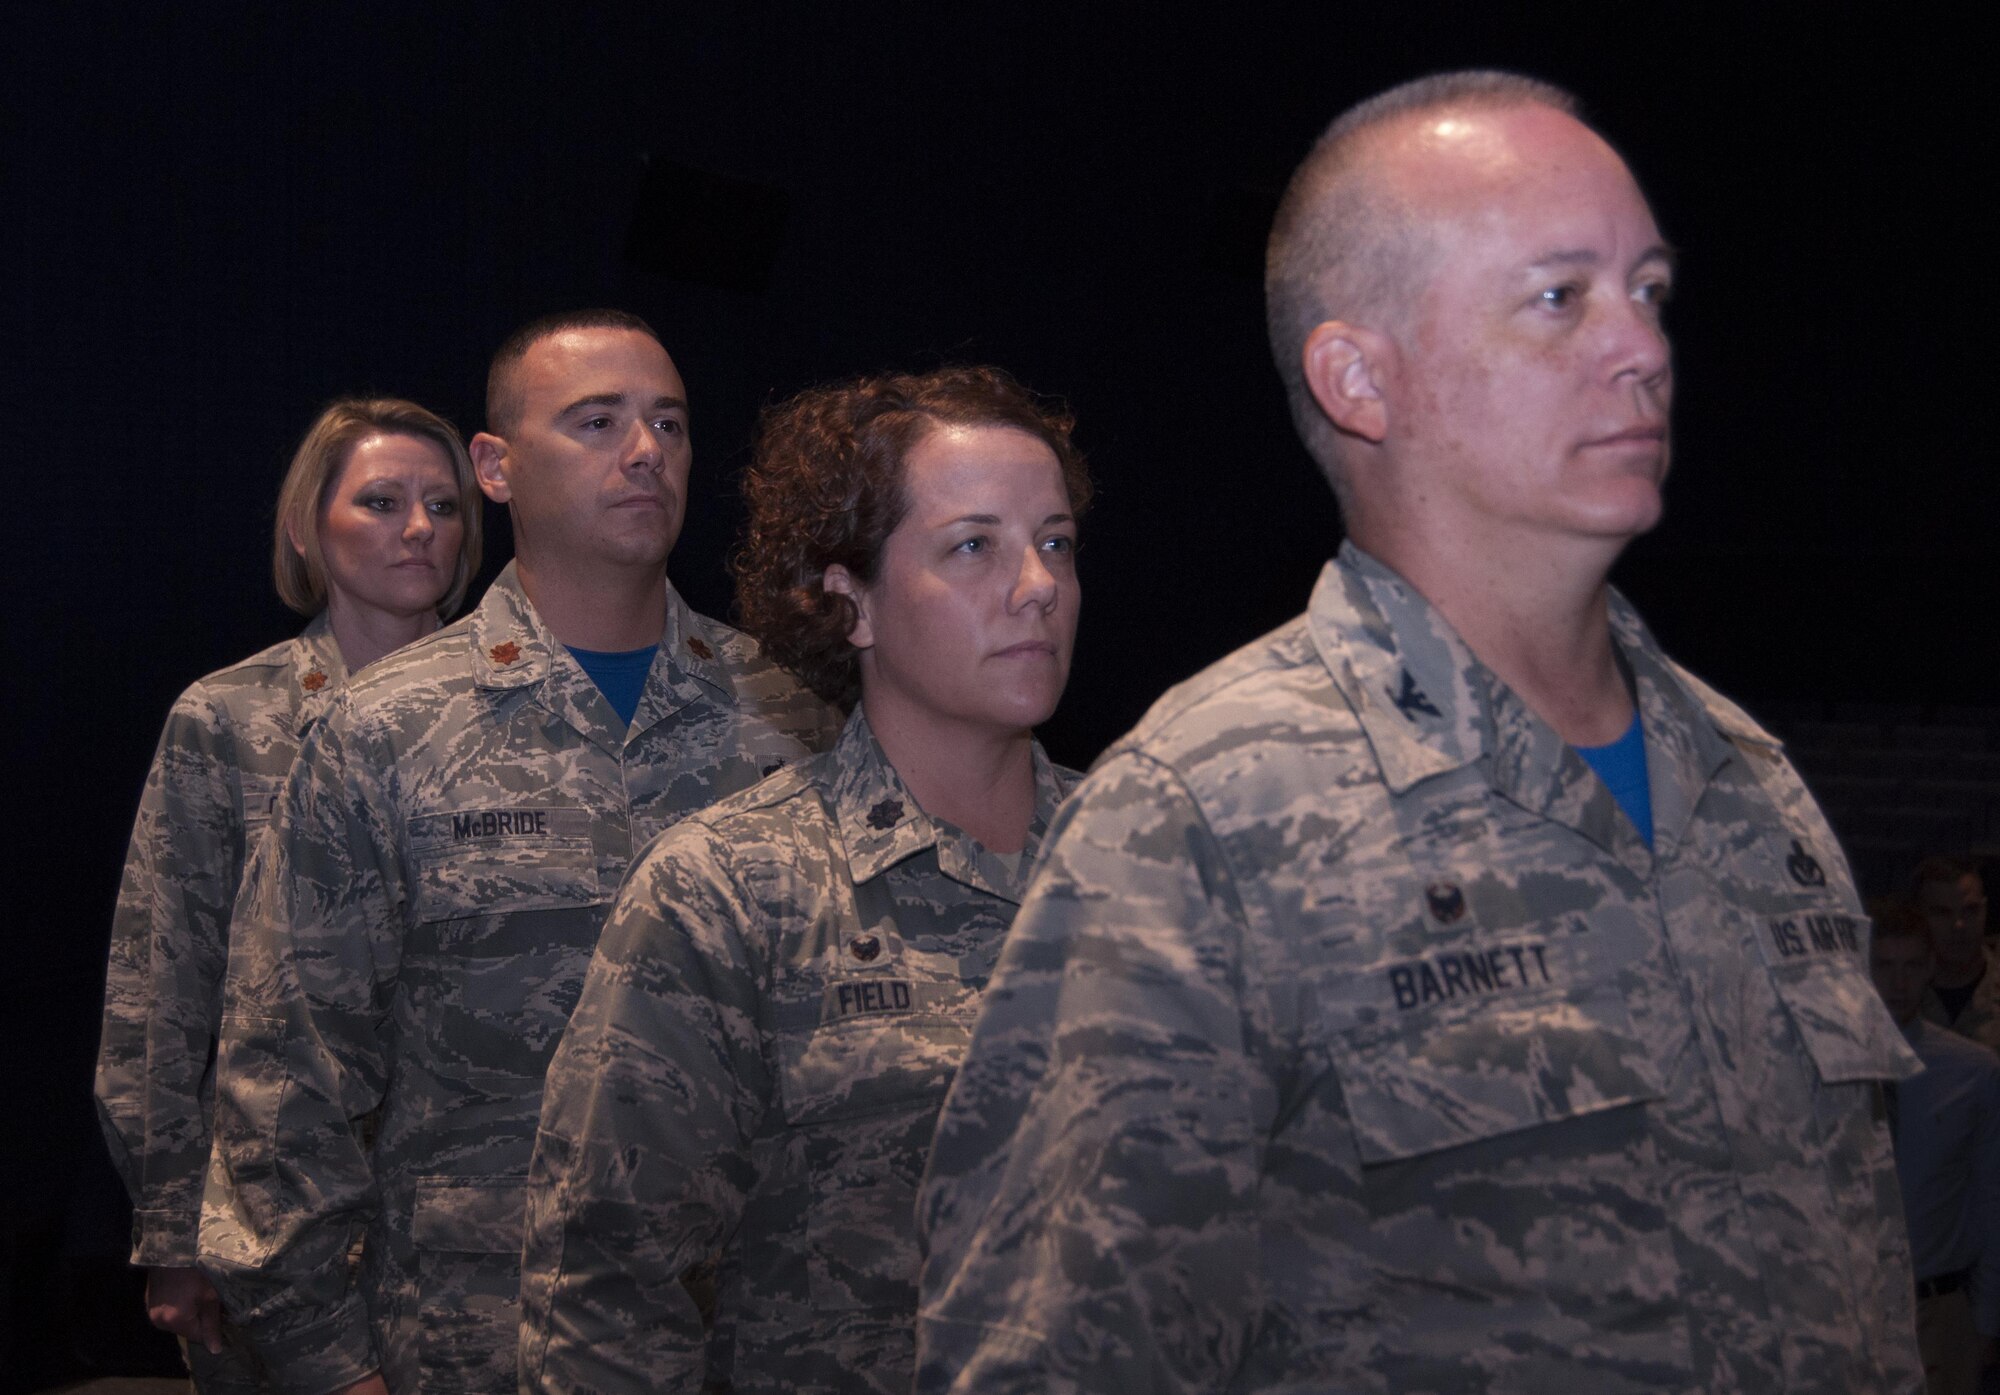 In a dual change of command ceremony at the base theater the 73rd Aerial Port Squadron and 301st Logistics Readiness Squadron welcome new commanders Sunday, Oct. 3 at Naval Air Station Fort Worth Joint Reserve Base, Texas. Lt. Col. Gloria Field relinquished command of the 73rd APS to Maj. Patrick McBride and Maj. Brandi Collen gave command of the 301st LRS to Field. Col. Jeffery Barnett, 301st Mission Support Group commander, presided over the ceremony. (U.S. Air Force photo by Senior Airman Jeromie Cano)                                                                                           